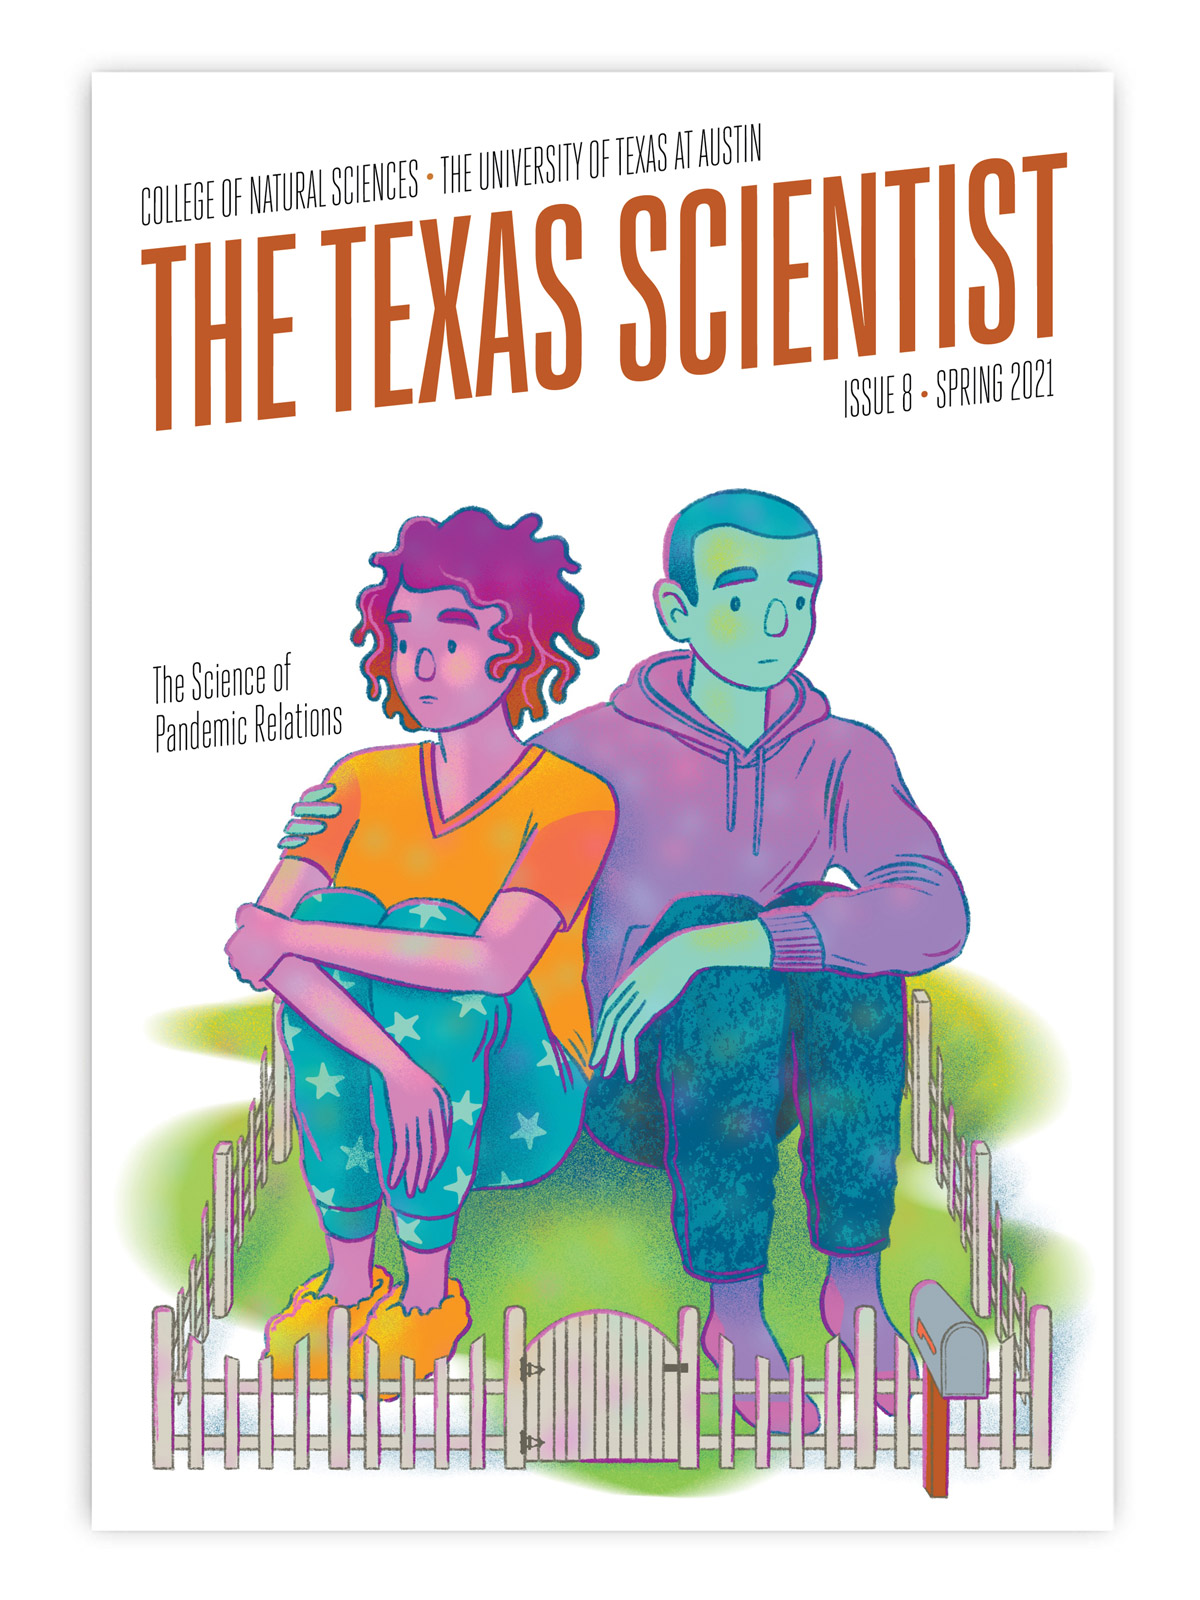 Texas Scientist 2021 cover - An illustration of a couple sitting together in a yard